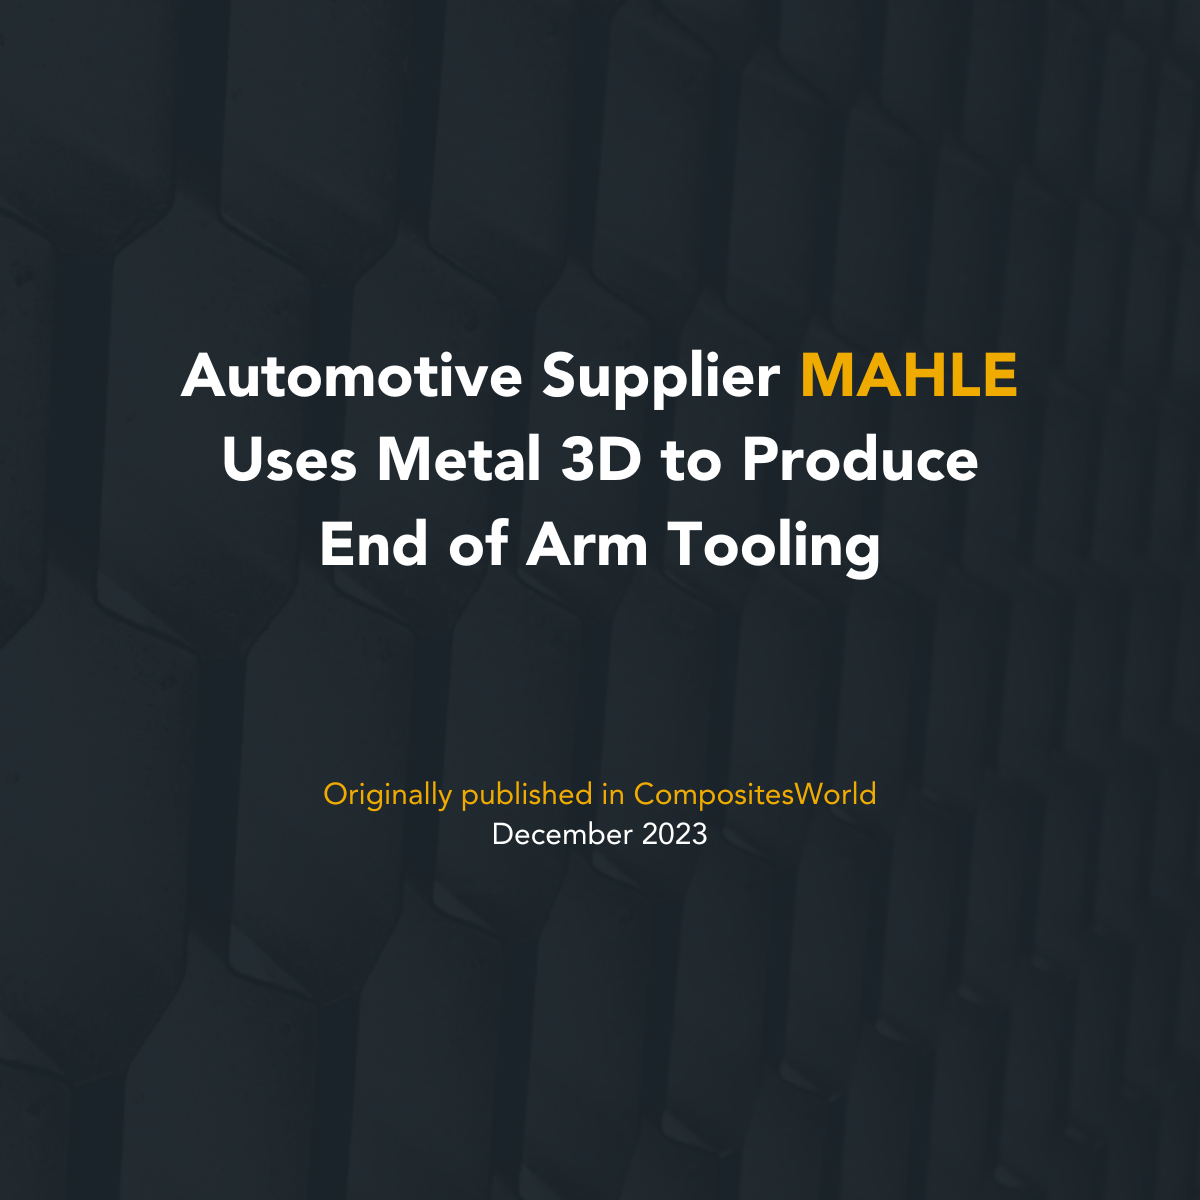 Composite World about MAHLE using end of arm tooling components made by Xact Metal 3D Printers